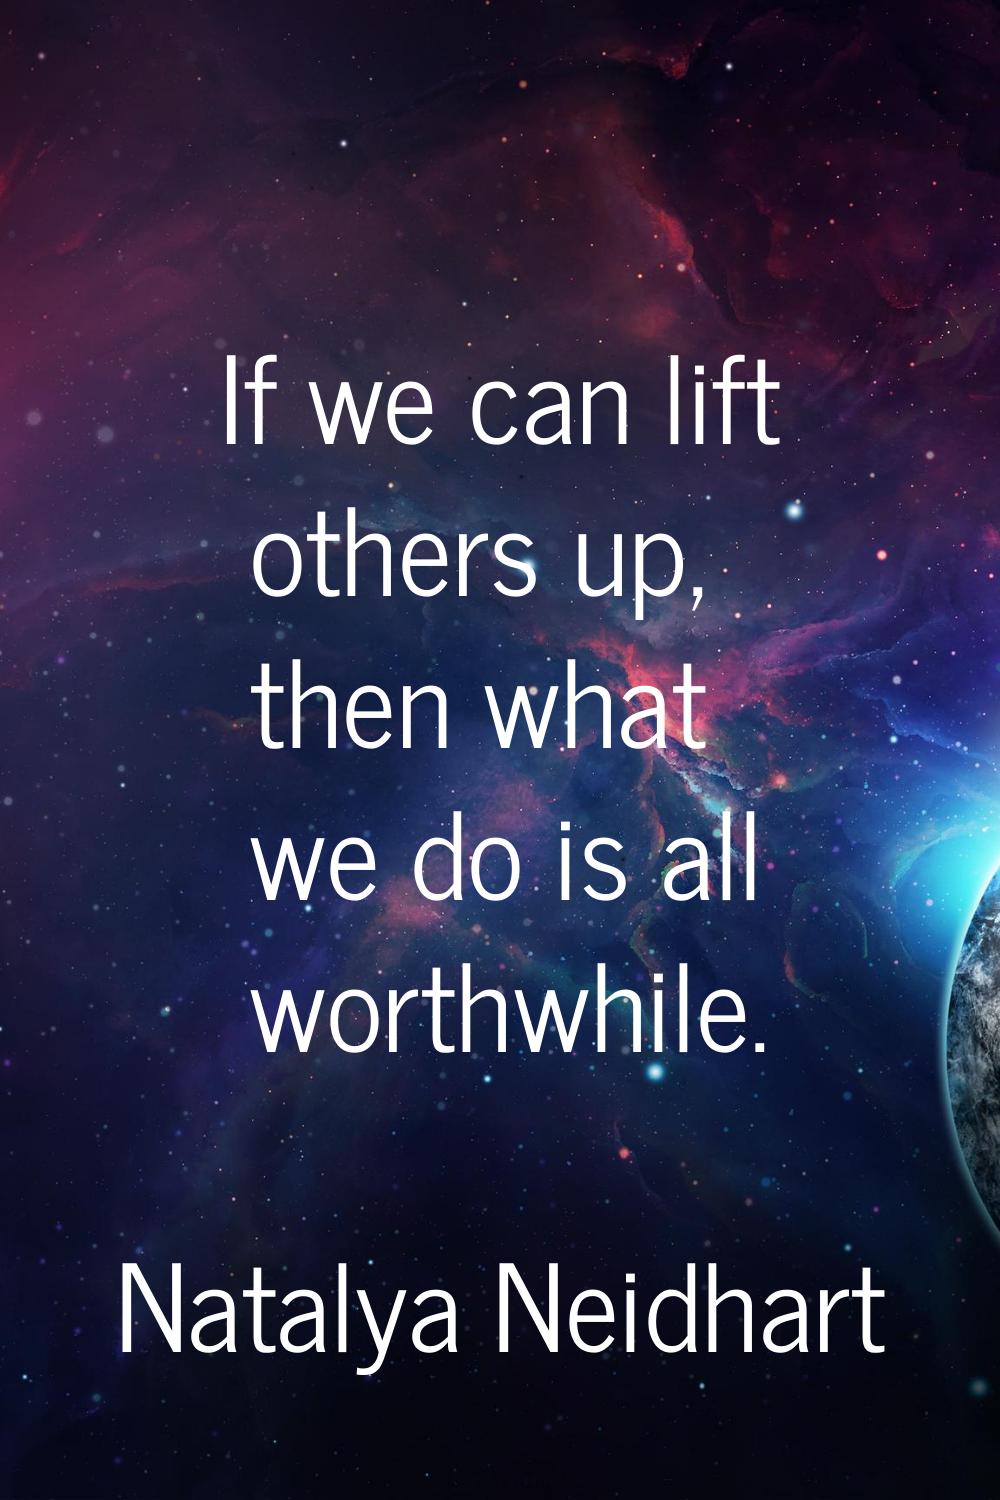 If we can lift others up, then what we do is all worthwhile.